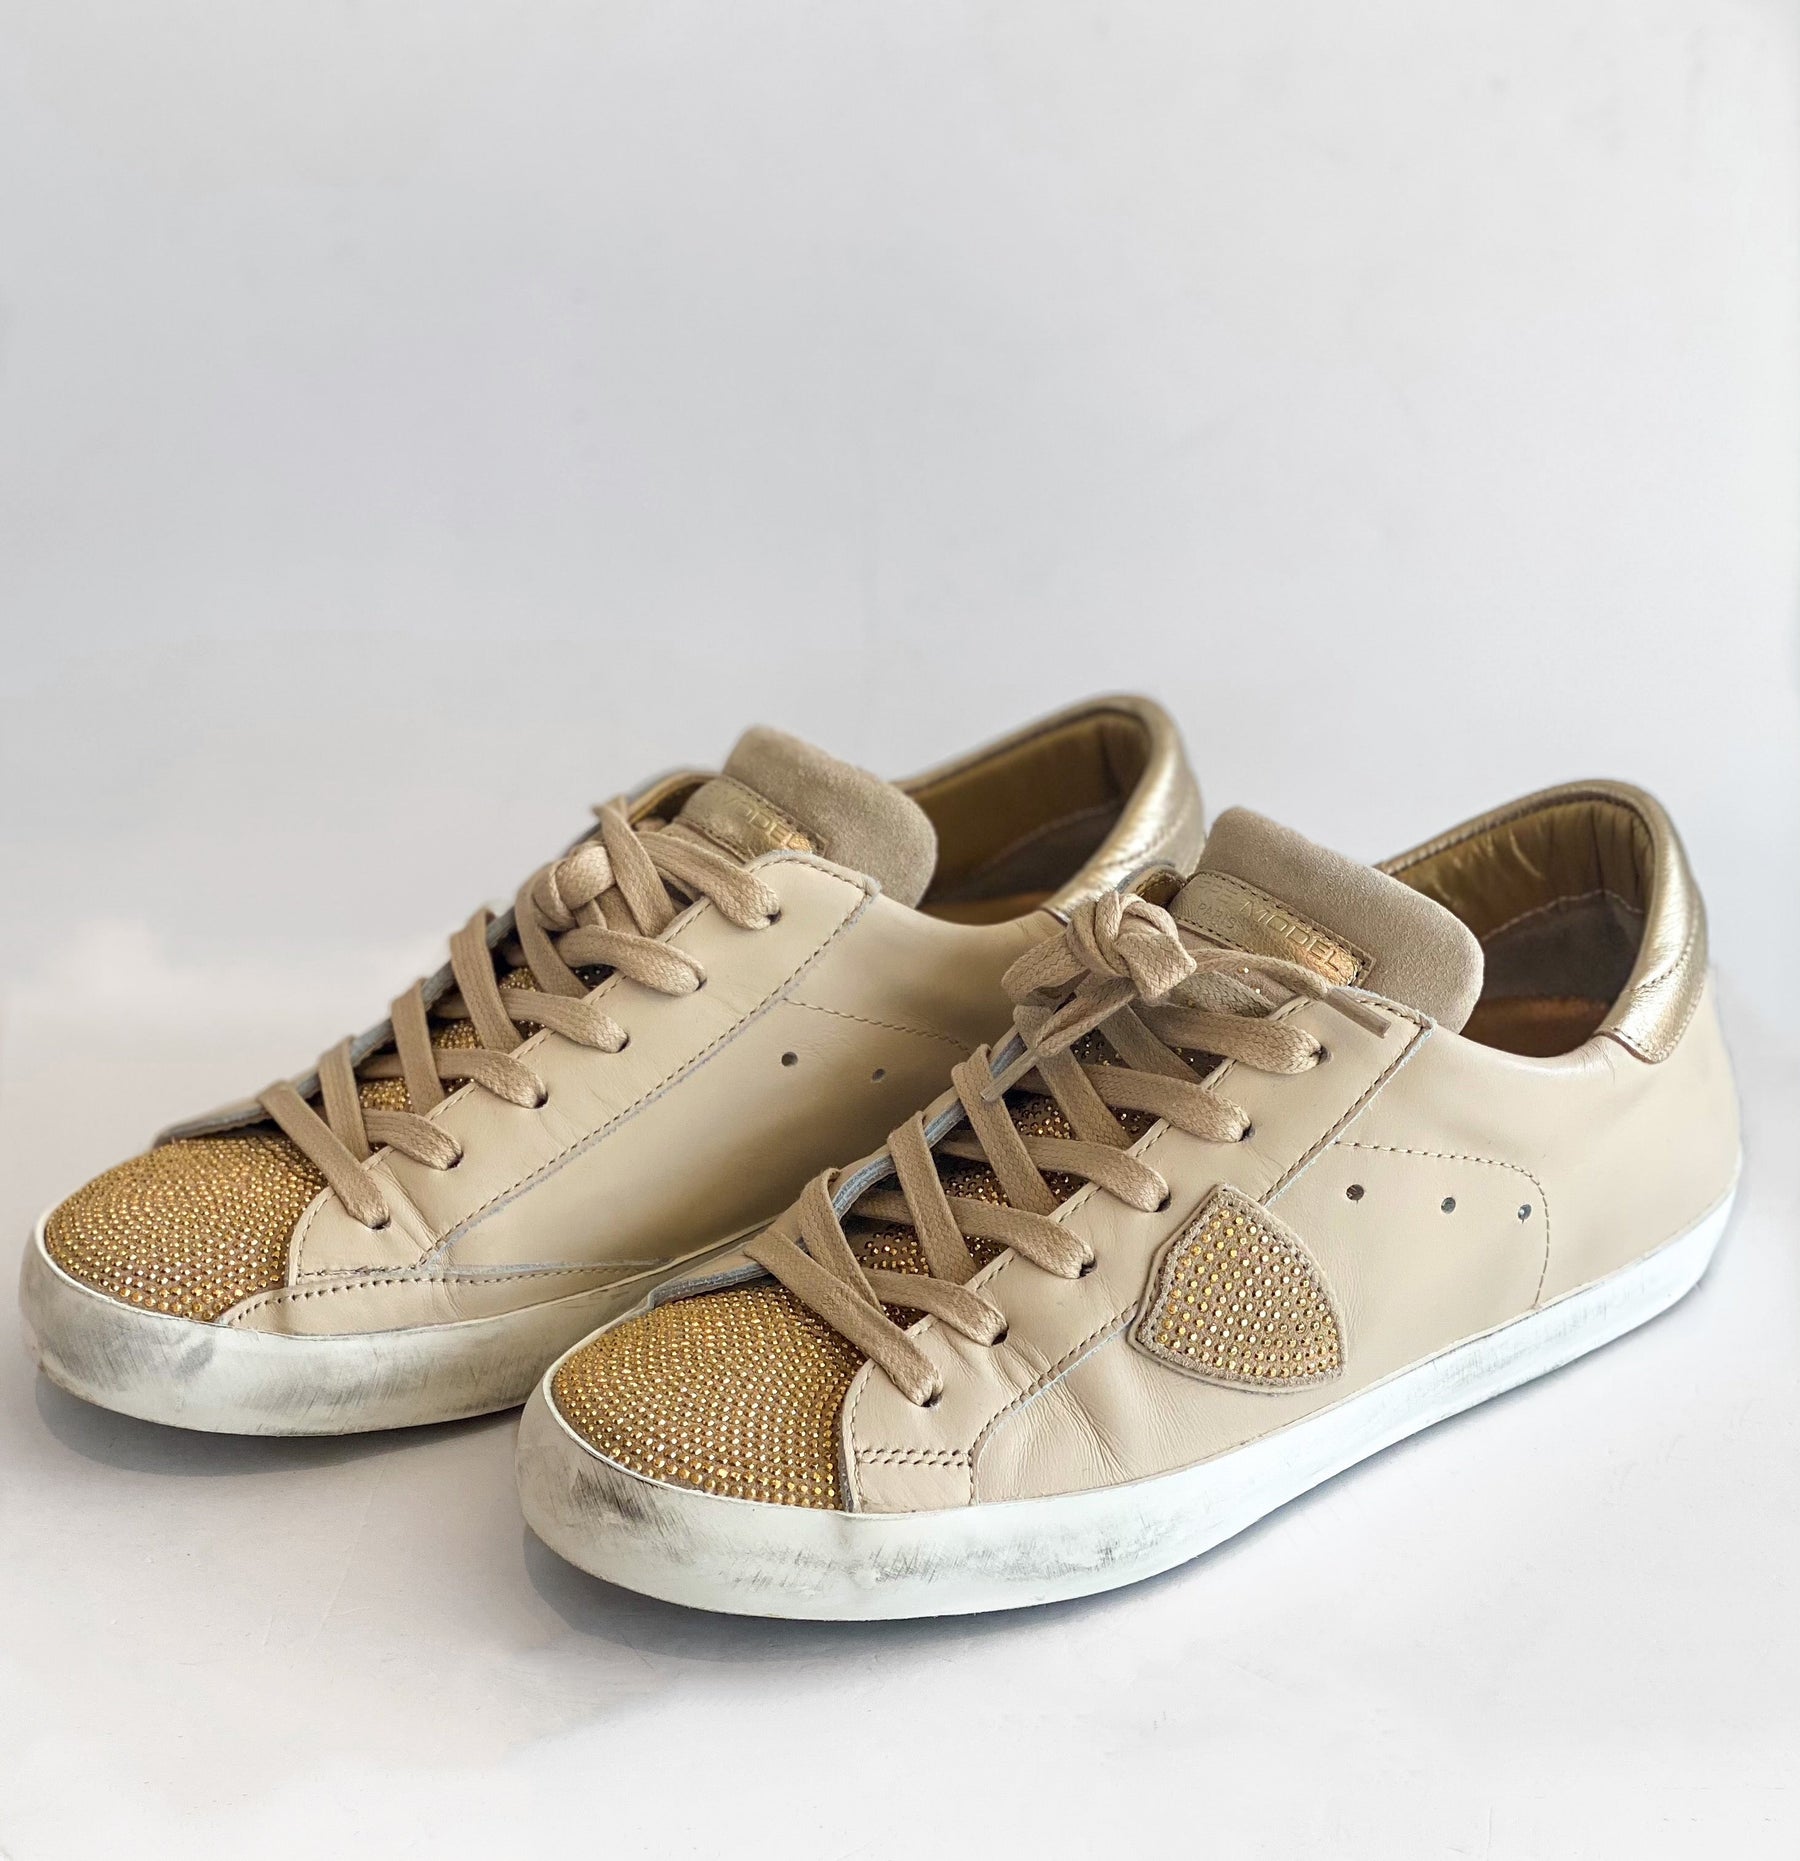 Philippe Model Leather Studded Sneakers side one